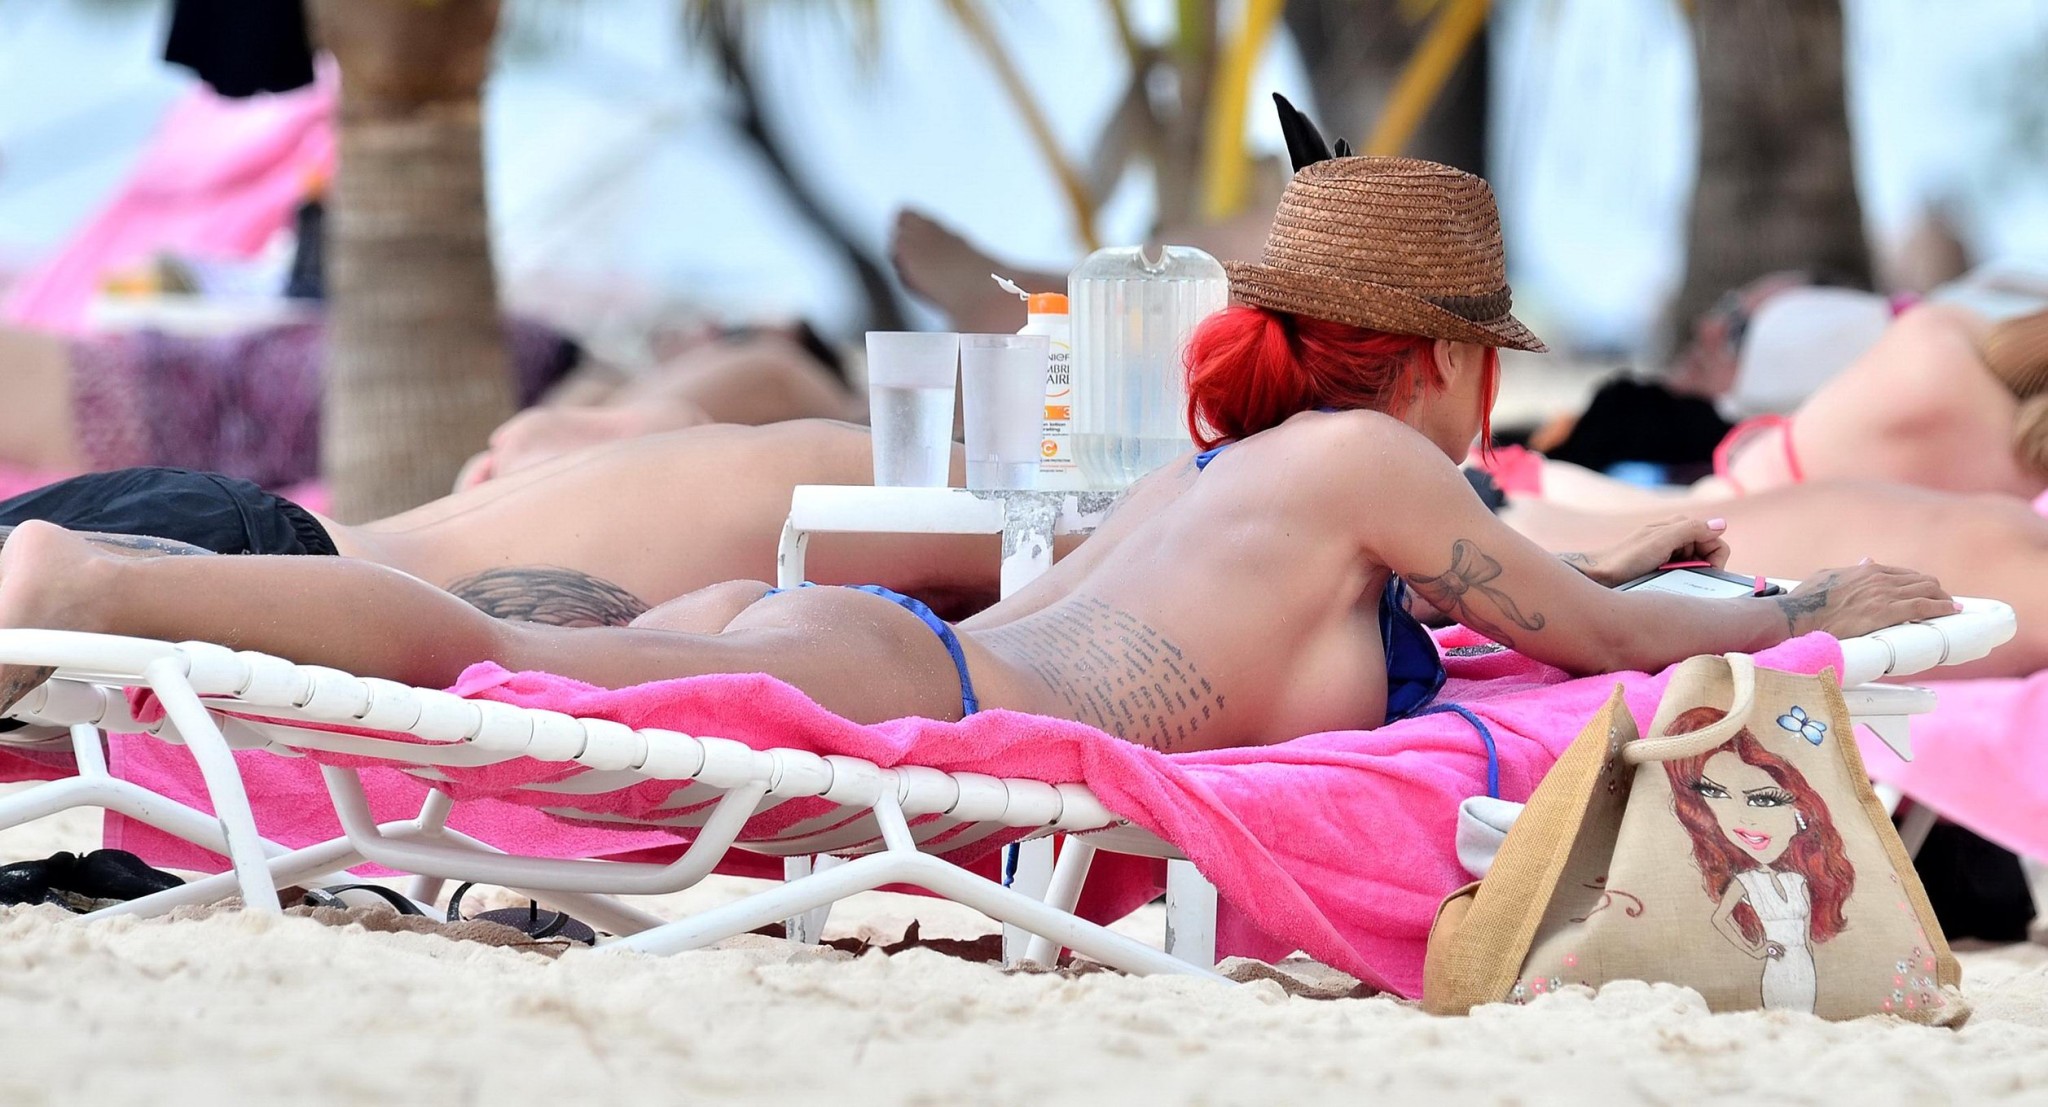 Busty Jodie Marsh tanning topless on a beach in Barbados #75245780